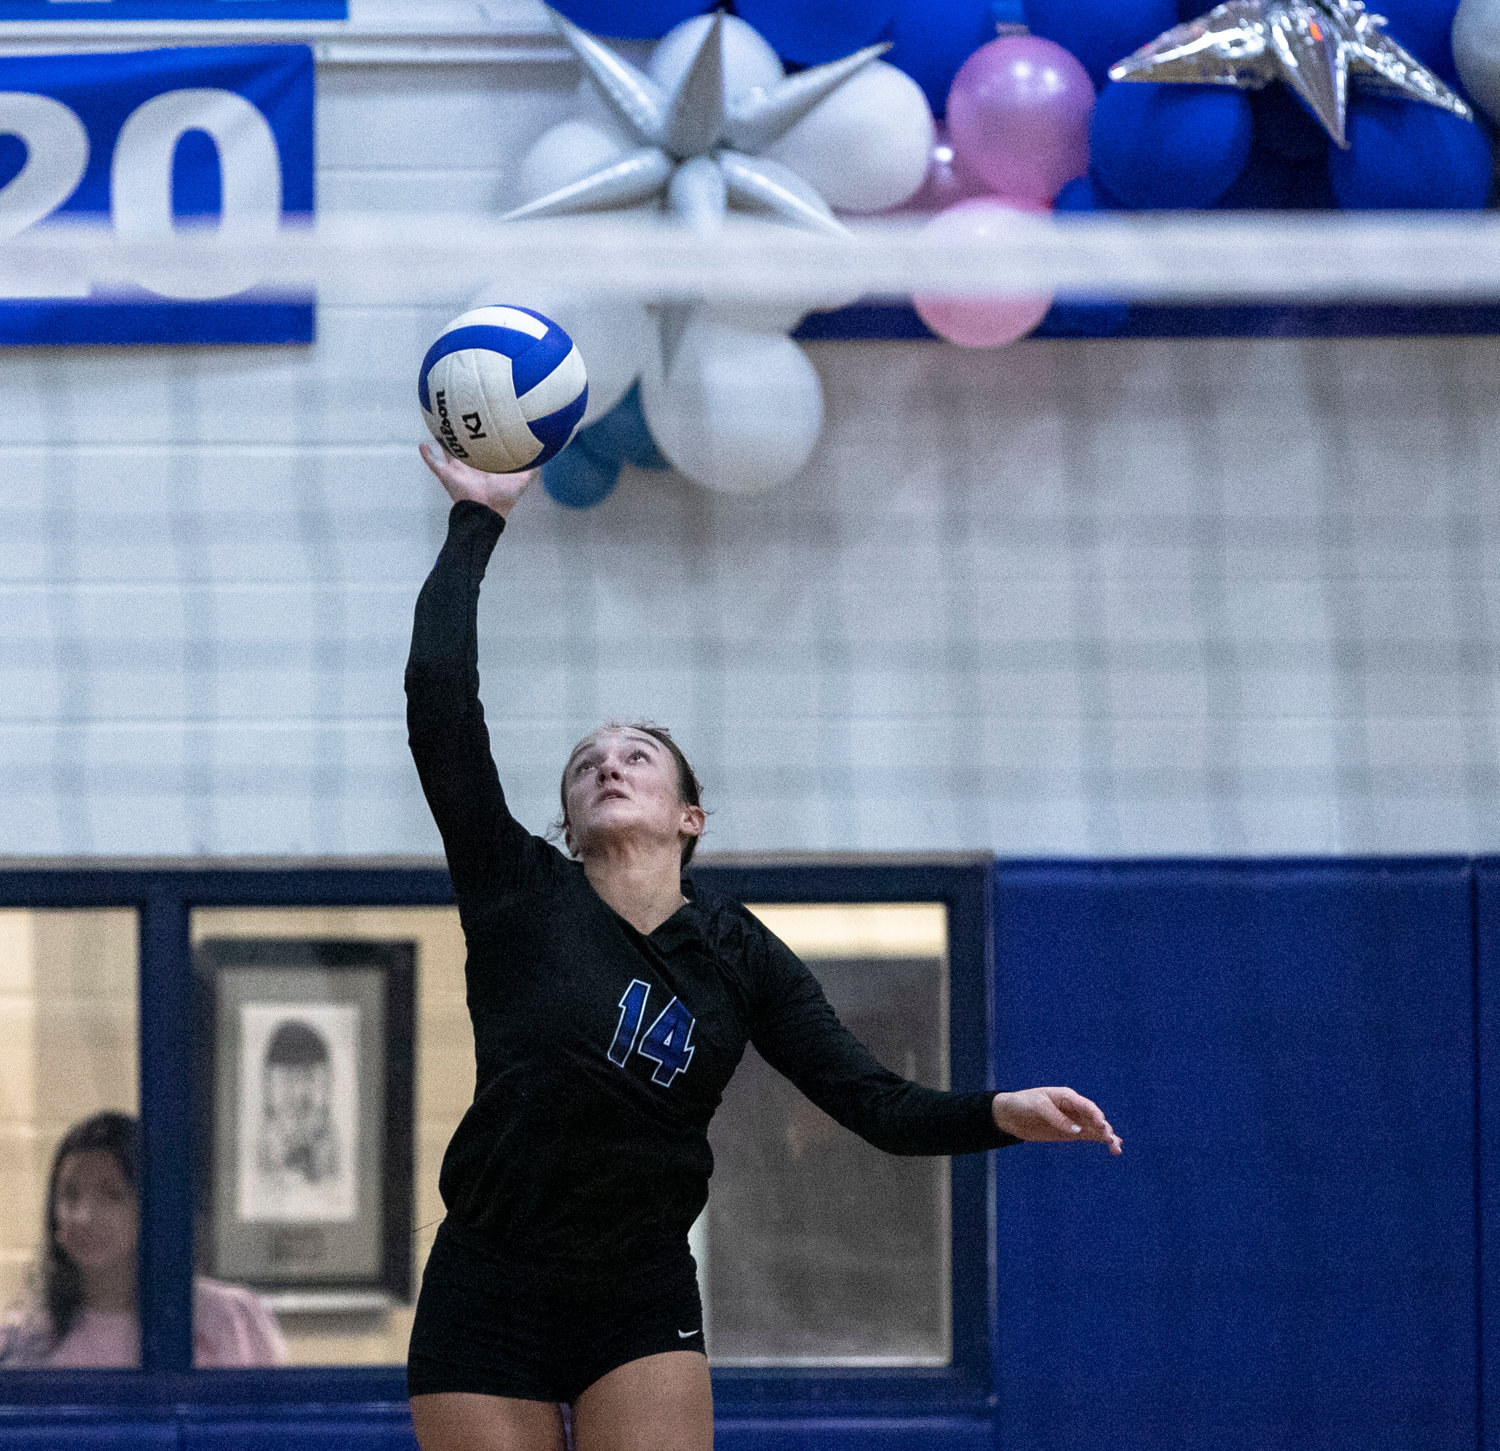 Bayside Academy’s Blakeley Robbins connects on a serve during the Admirals’ Class 6A Area 2 tournament match against Baldwin County at home Oct. 13, 2022. The state tournament MVP was named to the South All-Stars as one of four local players on the roster for July’s contest.